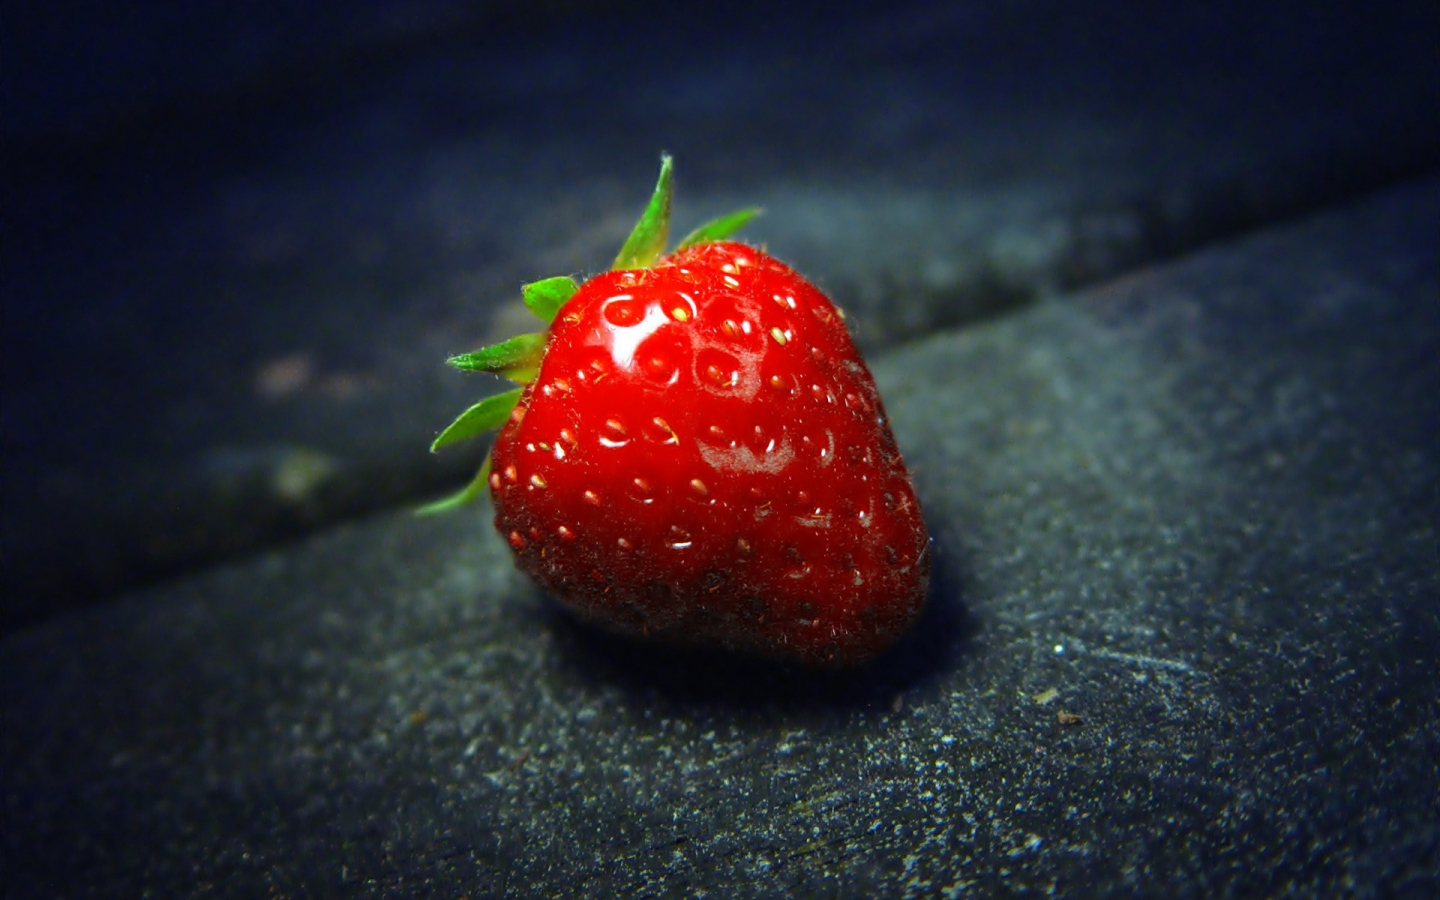 The Strawberry for 1440 x 900 widescreen resolution